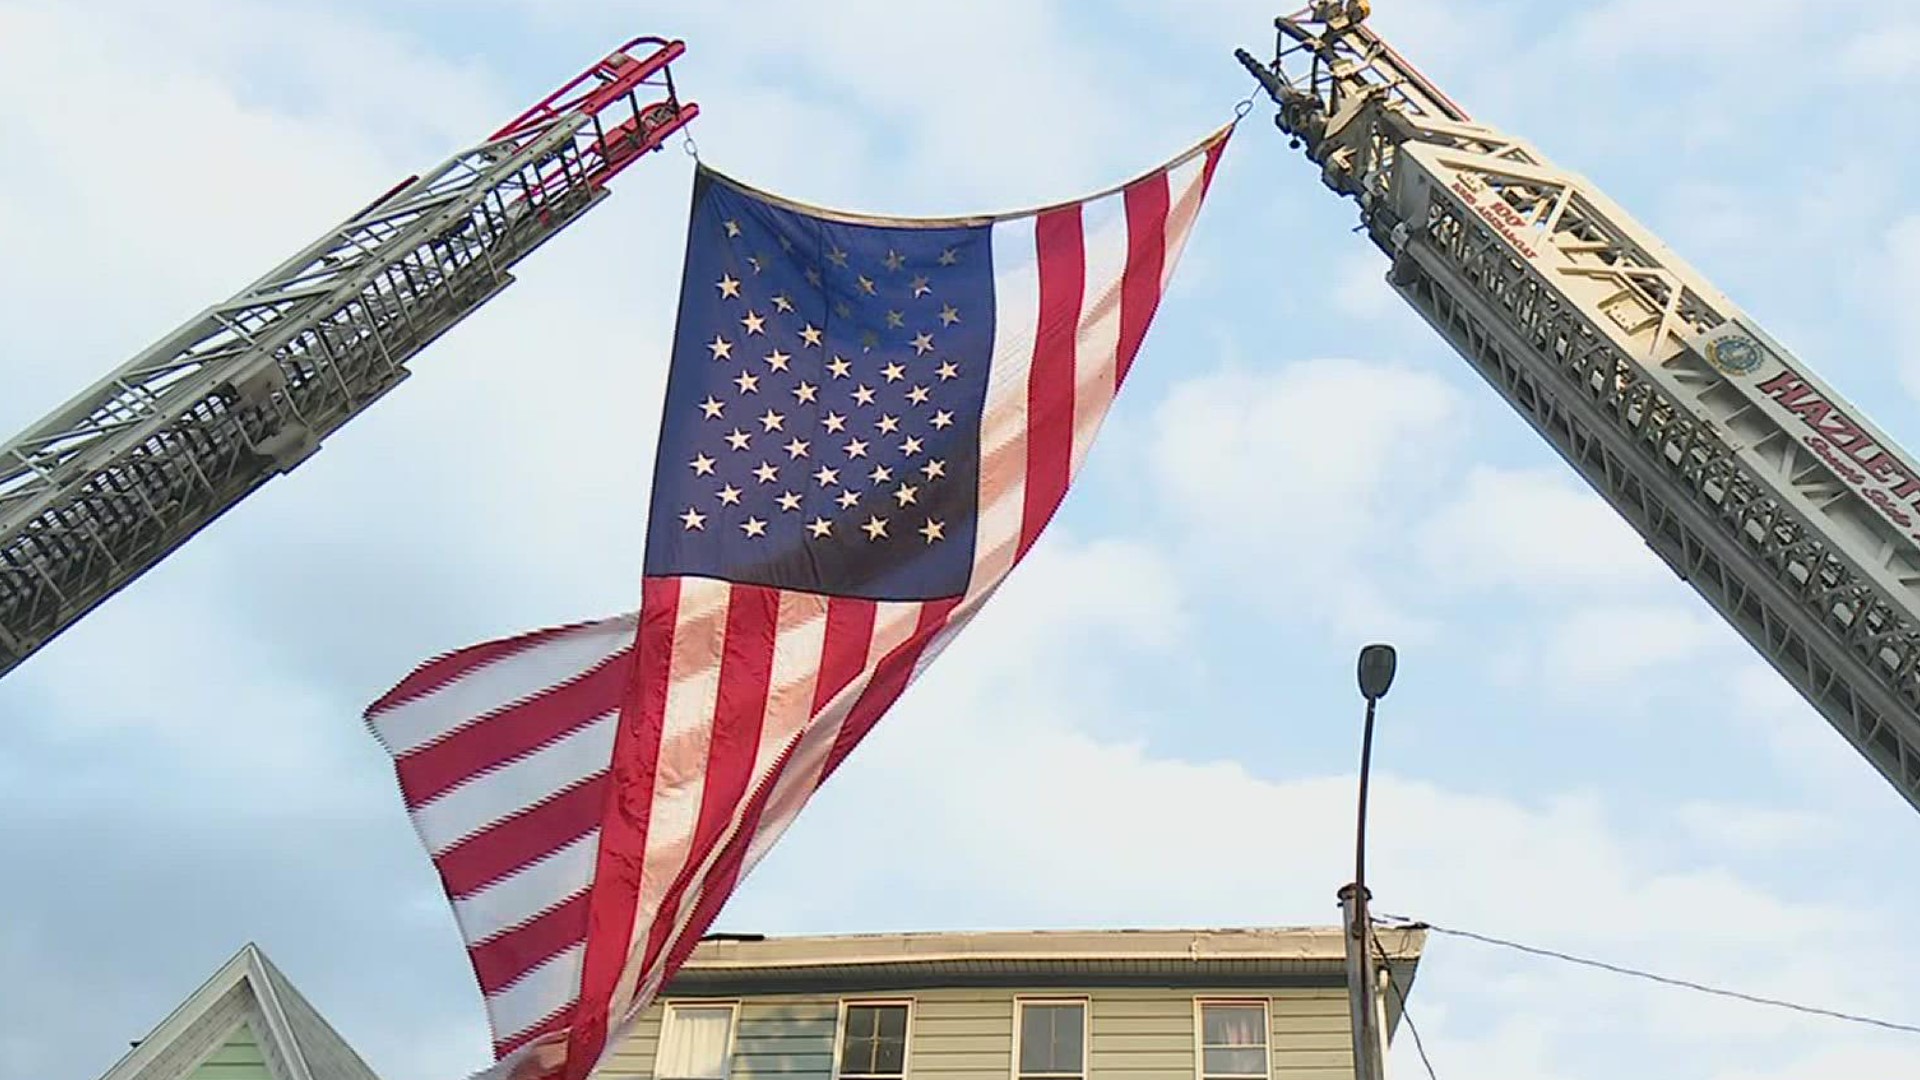 First responders in Luzerne County remembered the lives lost on September 11, 2001.